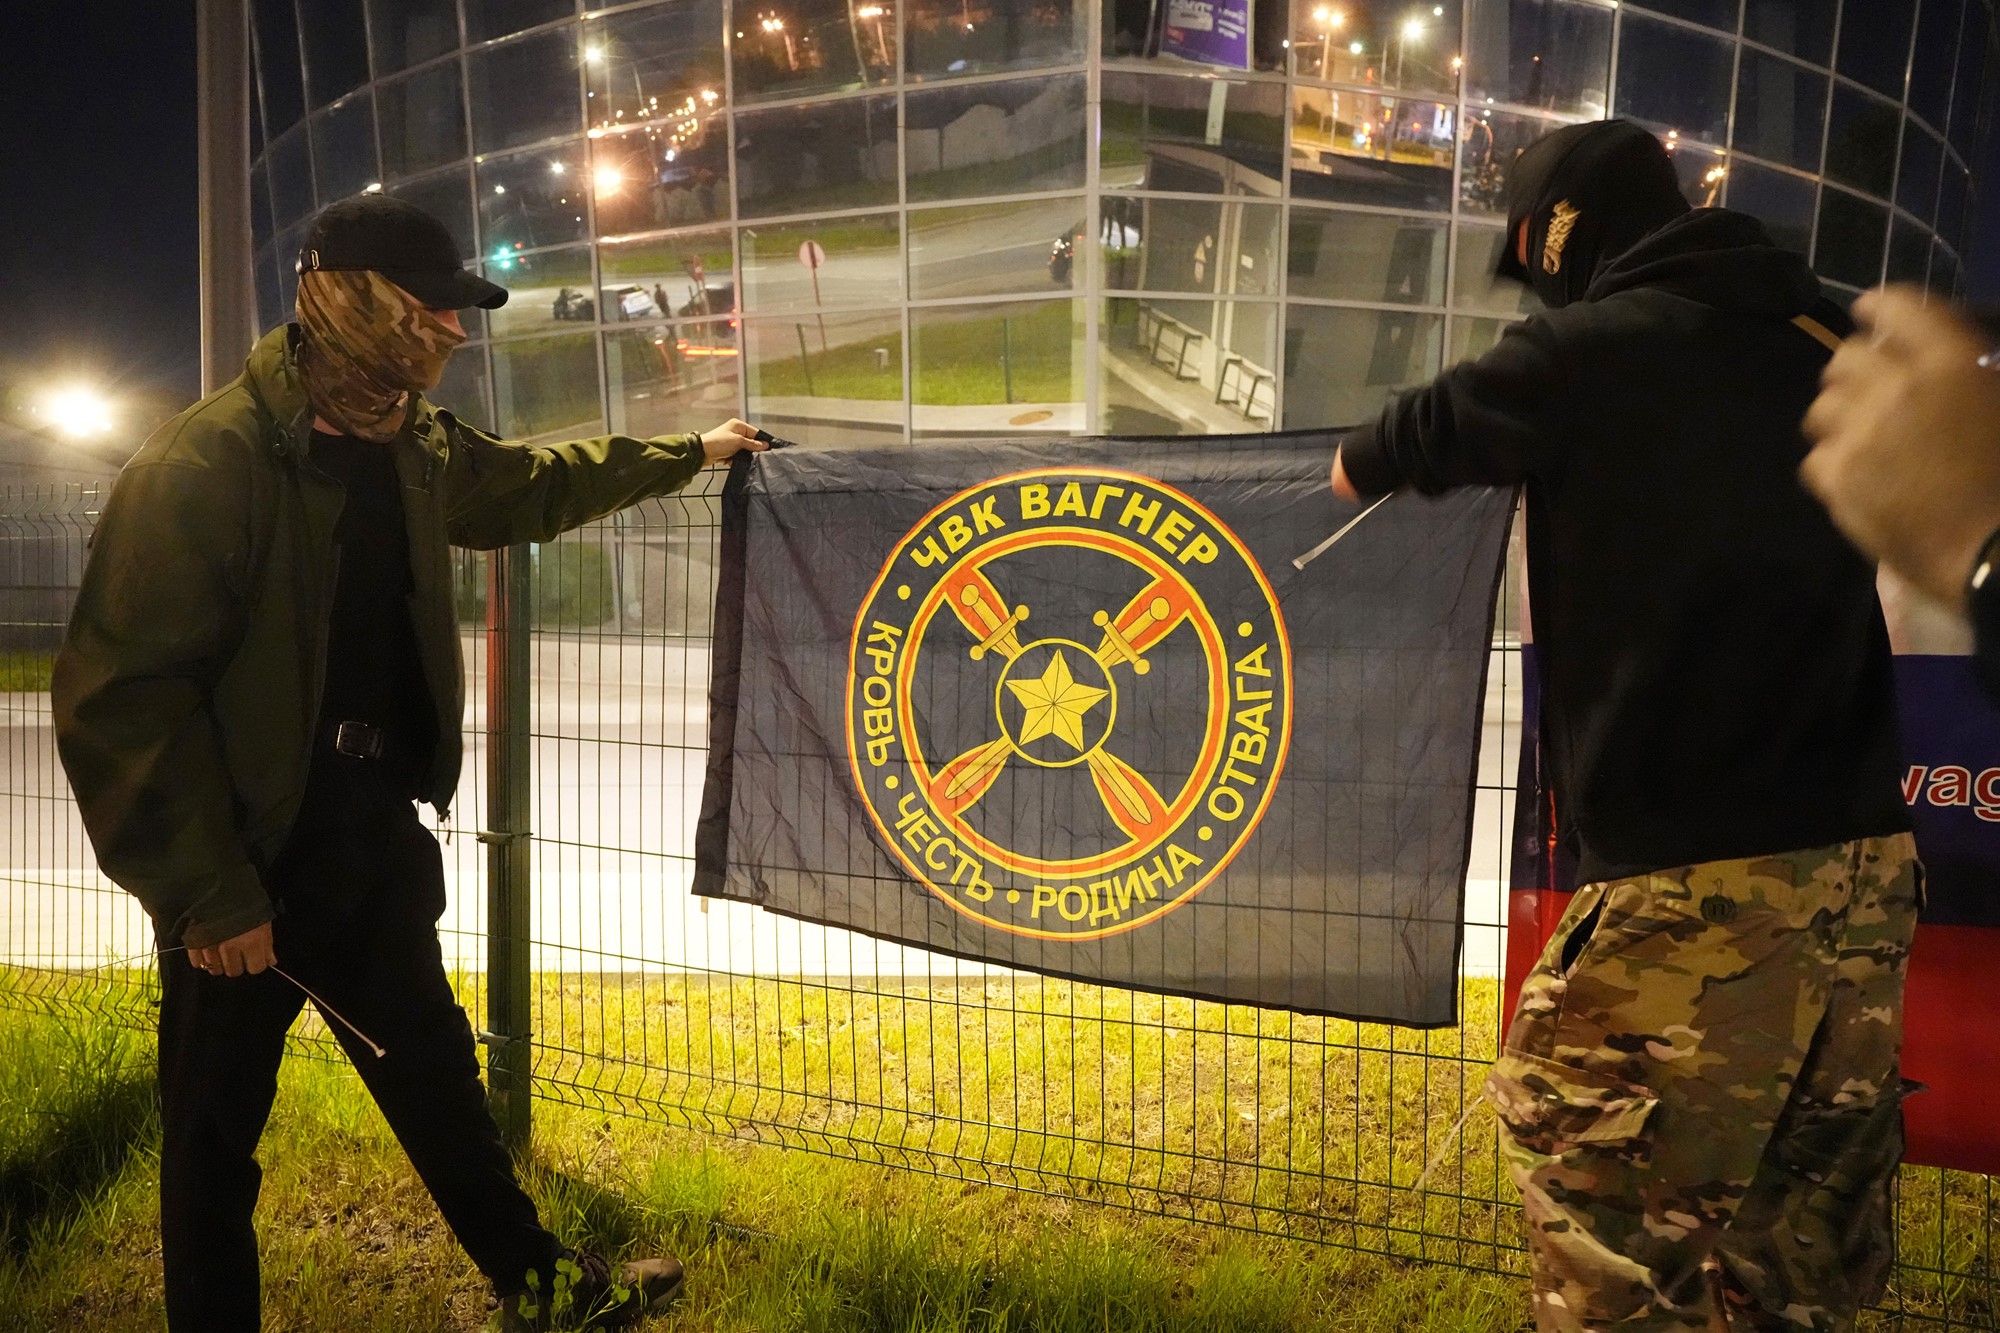 Two men, one wearing camo print pants and the other in black and khaki, both with their faces covered, hang a black flag with Russian writing on it up on a fence